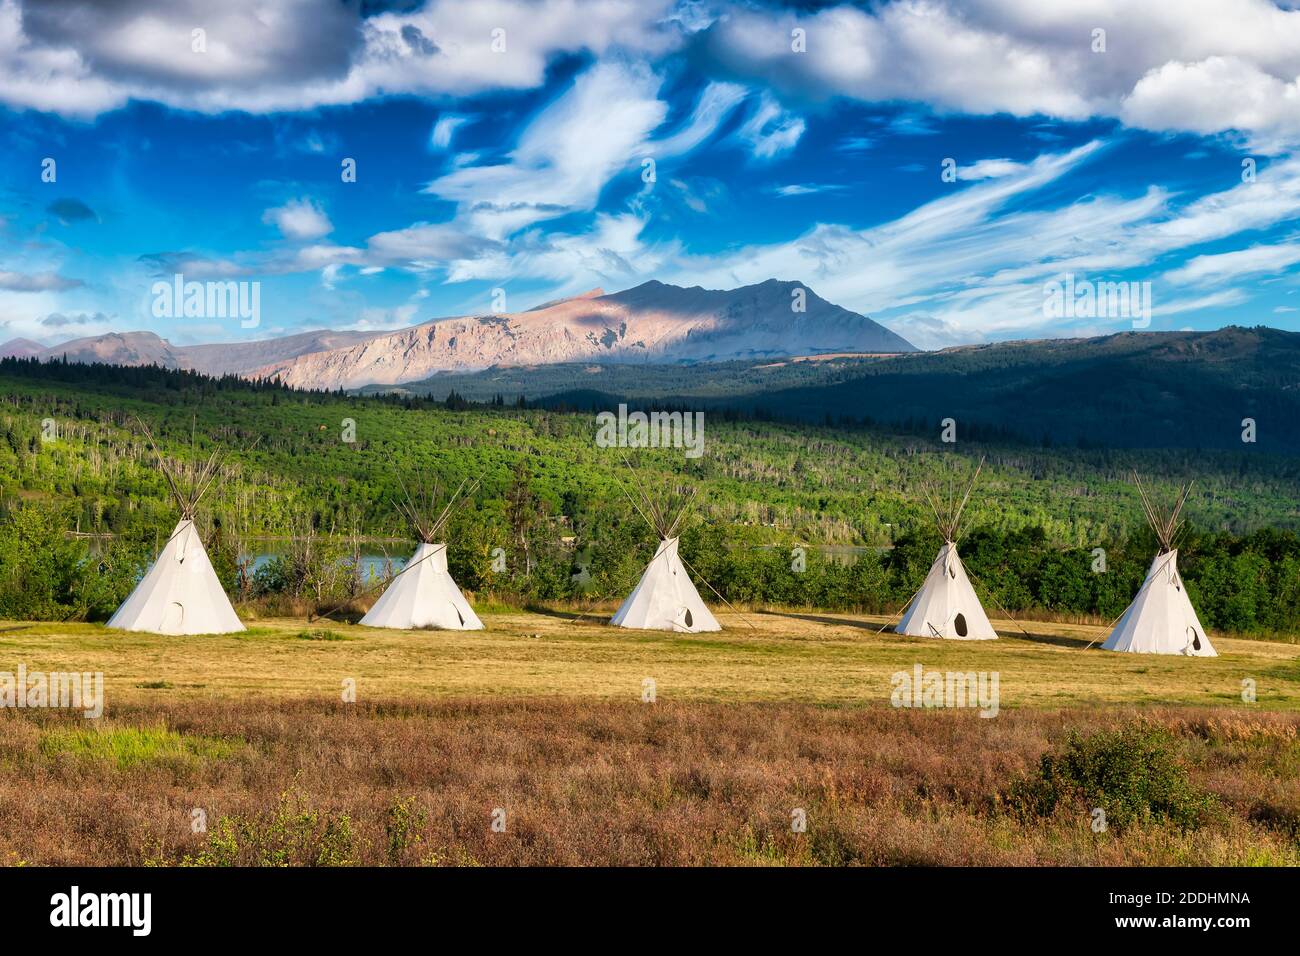 Tipi in a field with American Rocky Mountain Stock Photo